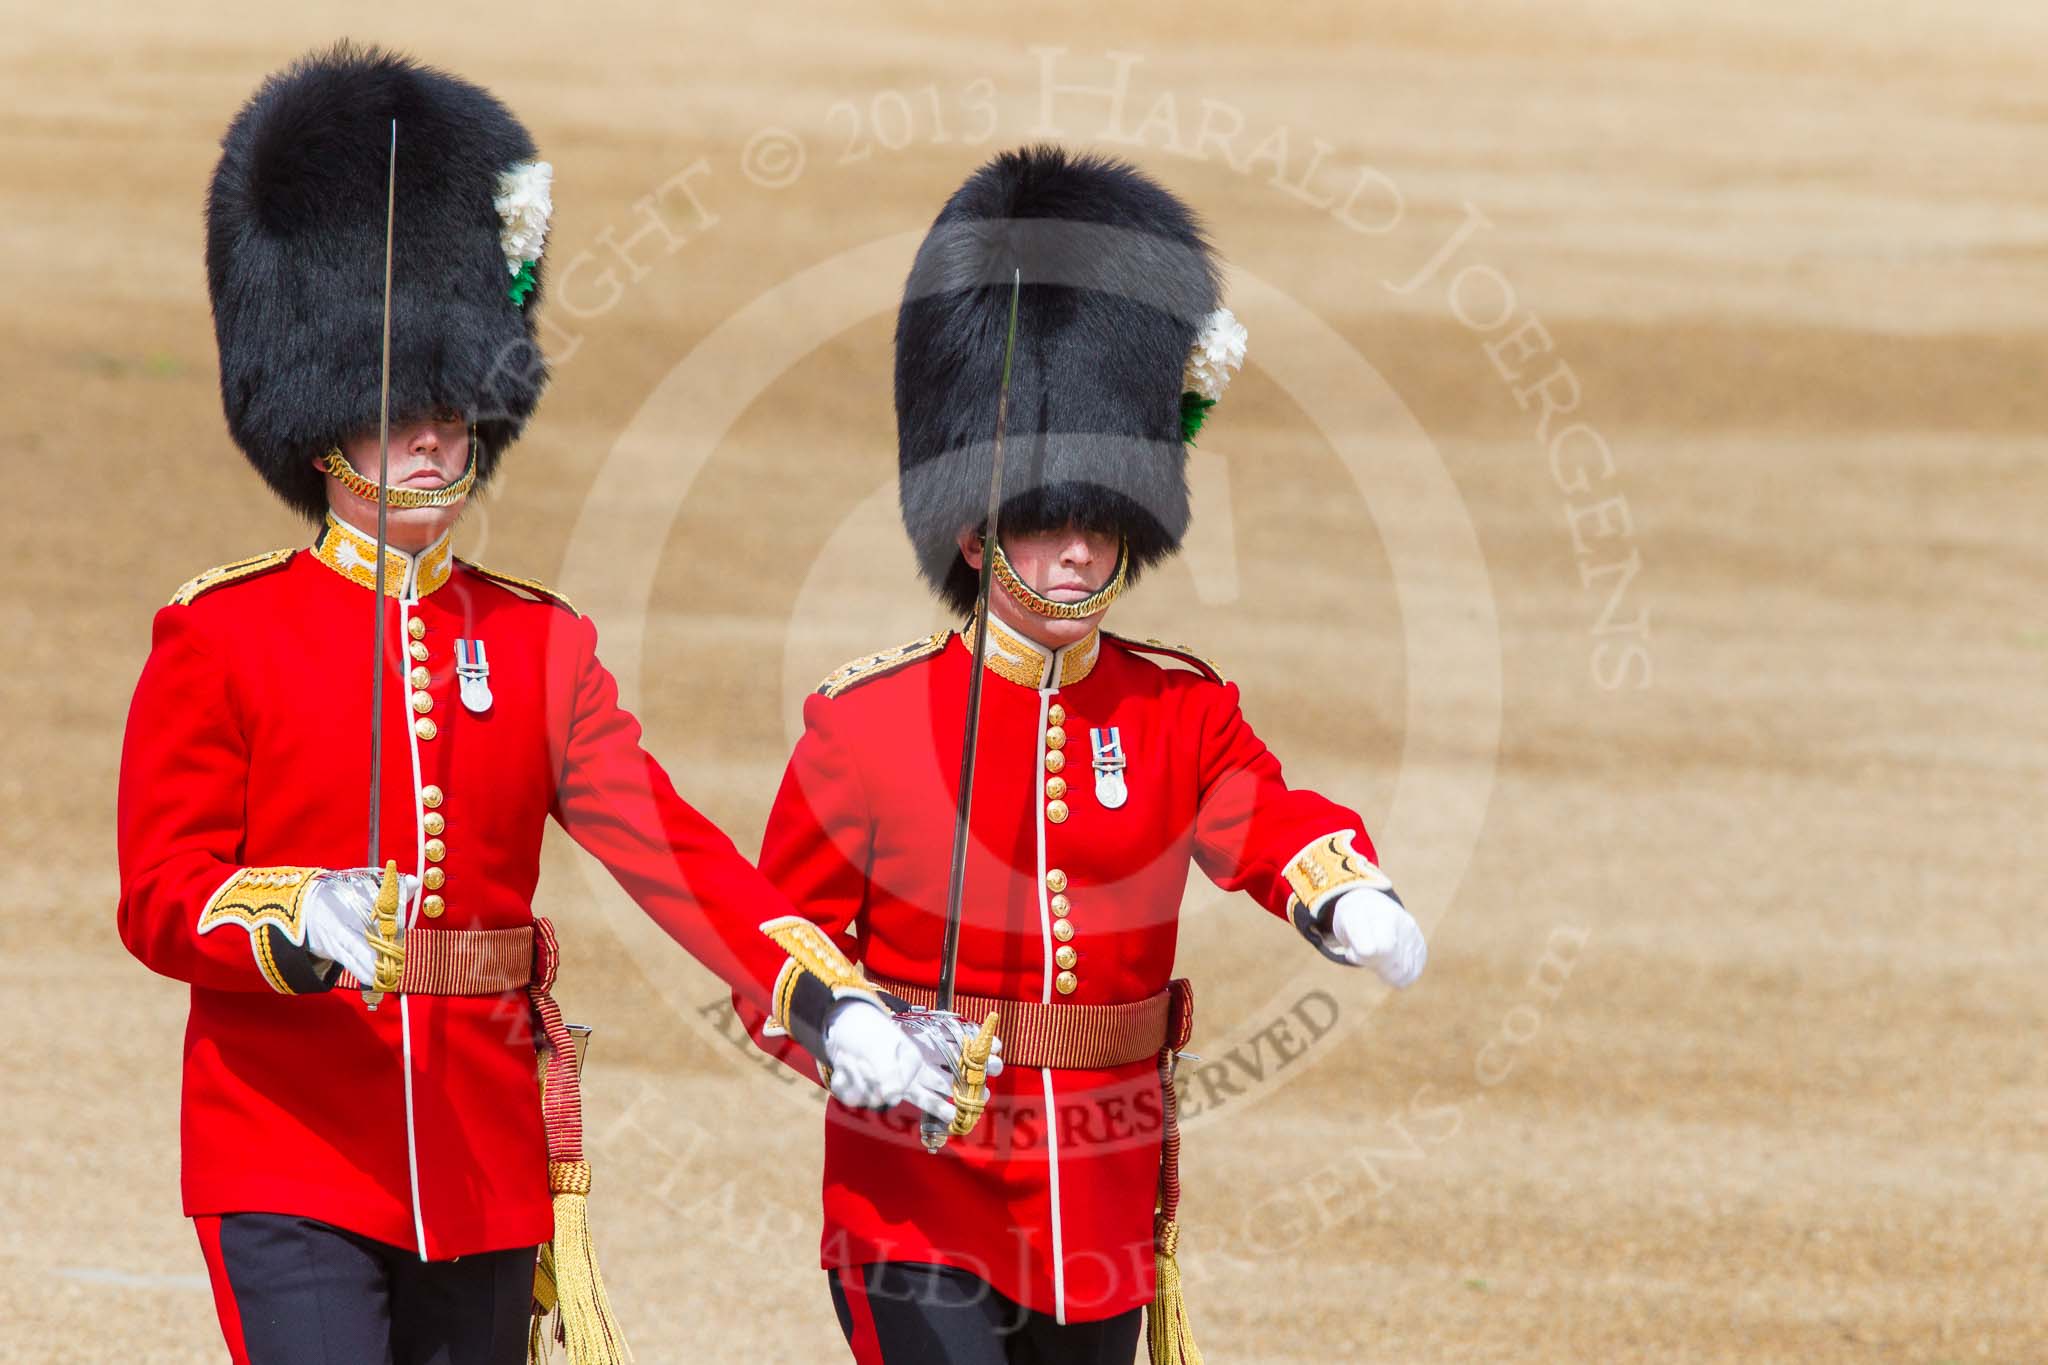 Trooping the Colour 2013: The Subaltern of No. 1 Guard, Captain F O Lloyd-George, and the Subaltern of No. 2 Guard, Captain B Bardsley, are marching together to Horse Guards Arch. They will return later, with the other 16 officers, three for each guard. Image #122, 15 June 2013 10:33 Horse Guards Parade, London, UK